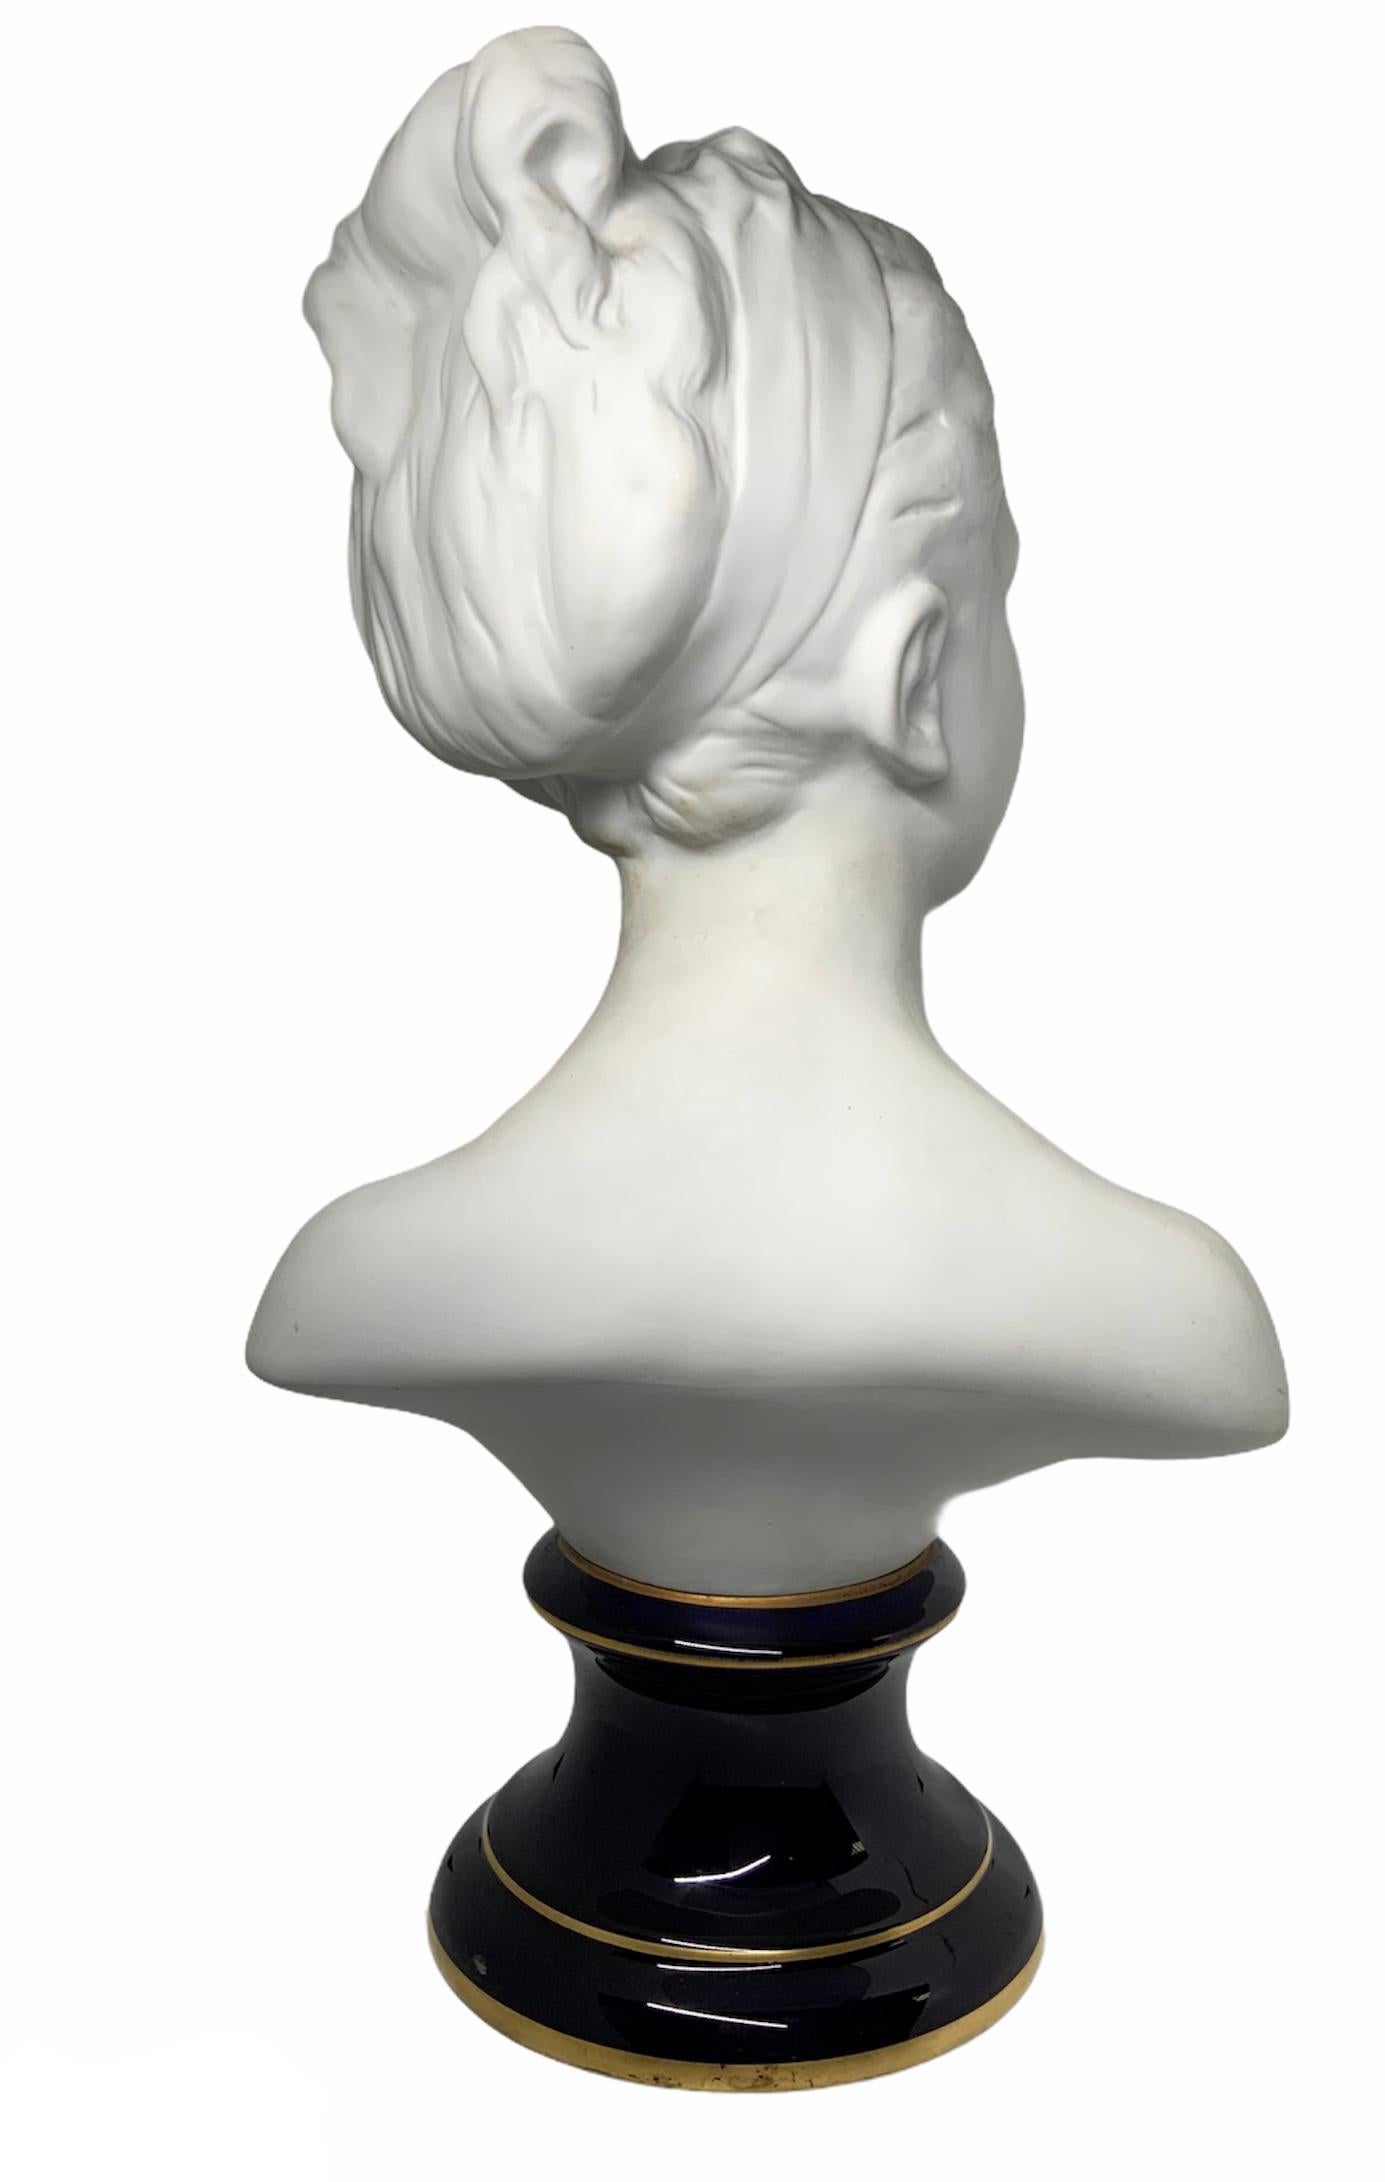 Molded Tharaud Limoges France Bisque Porcelain Large Bust of a Girl